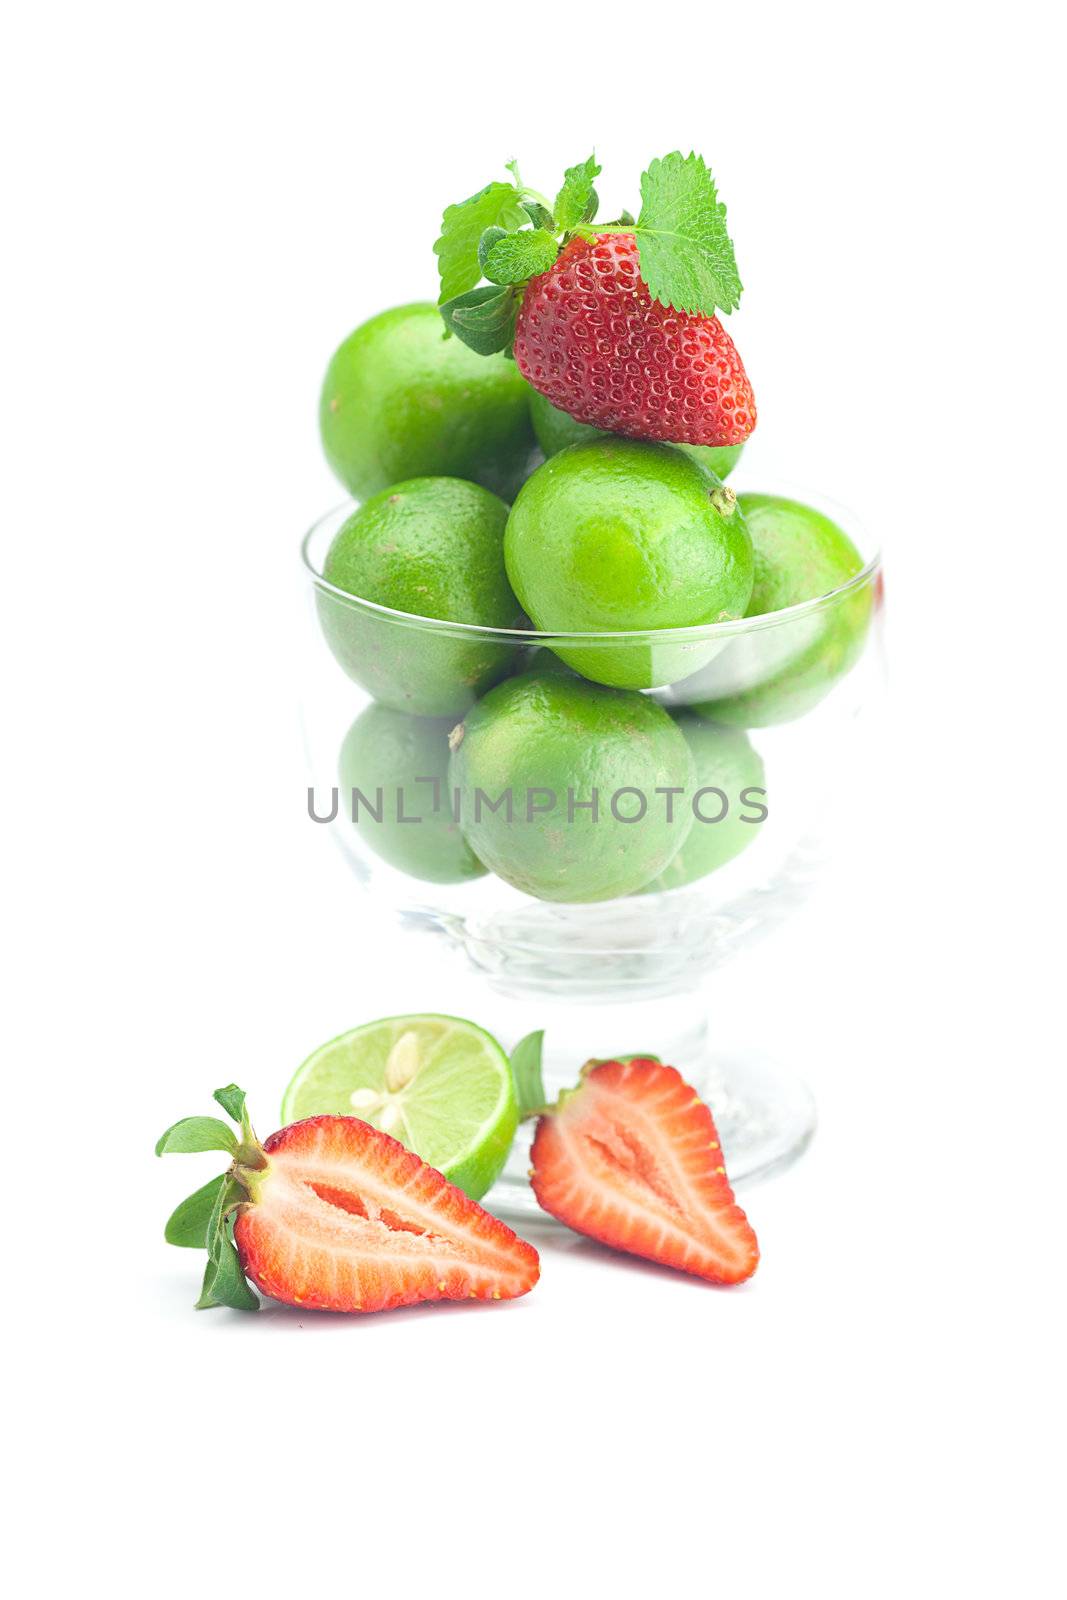 lime in a glass bowl, strawberry and mint isolated on white